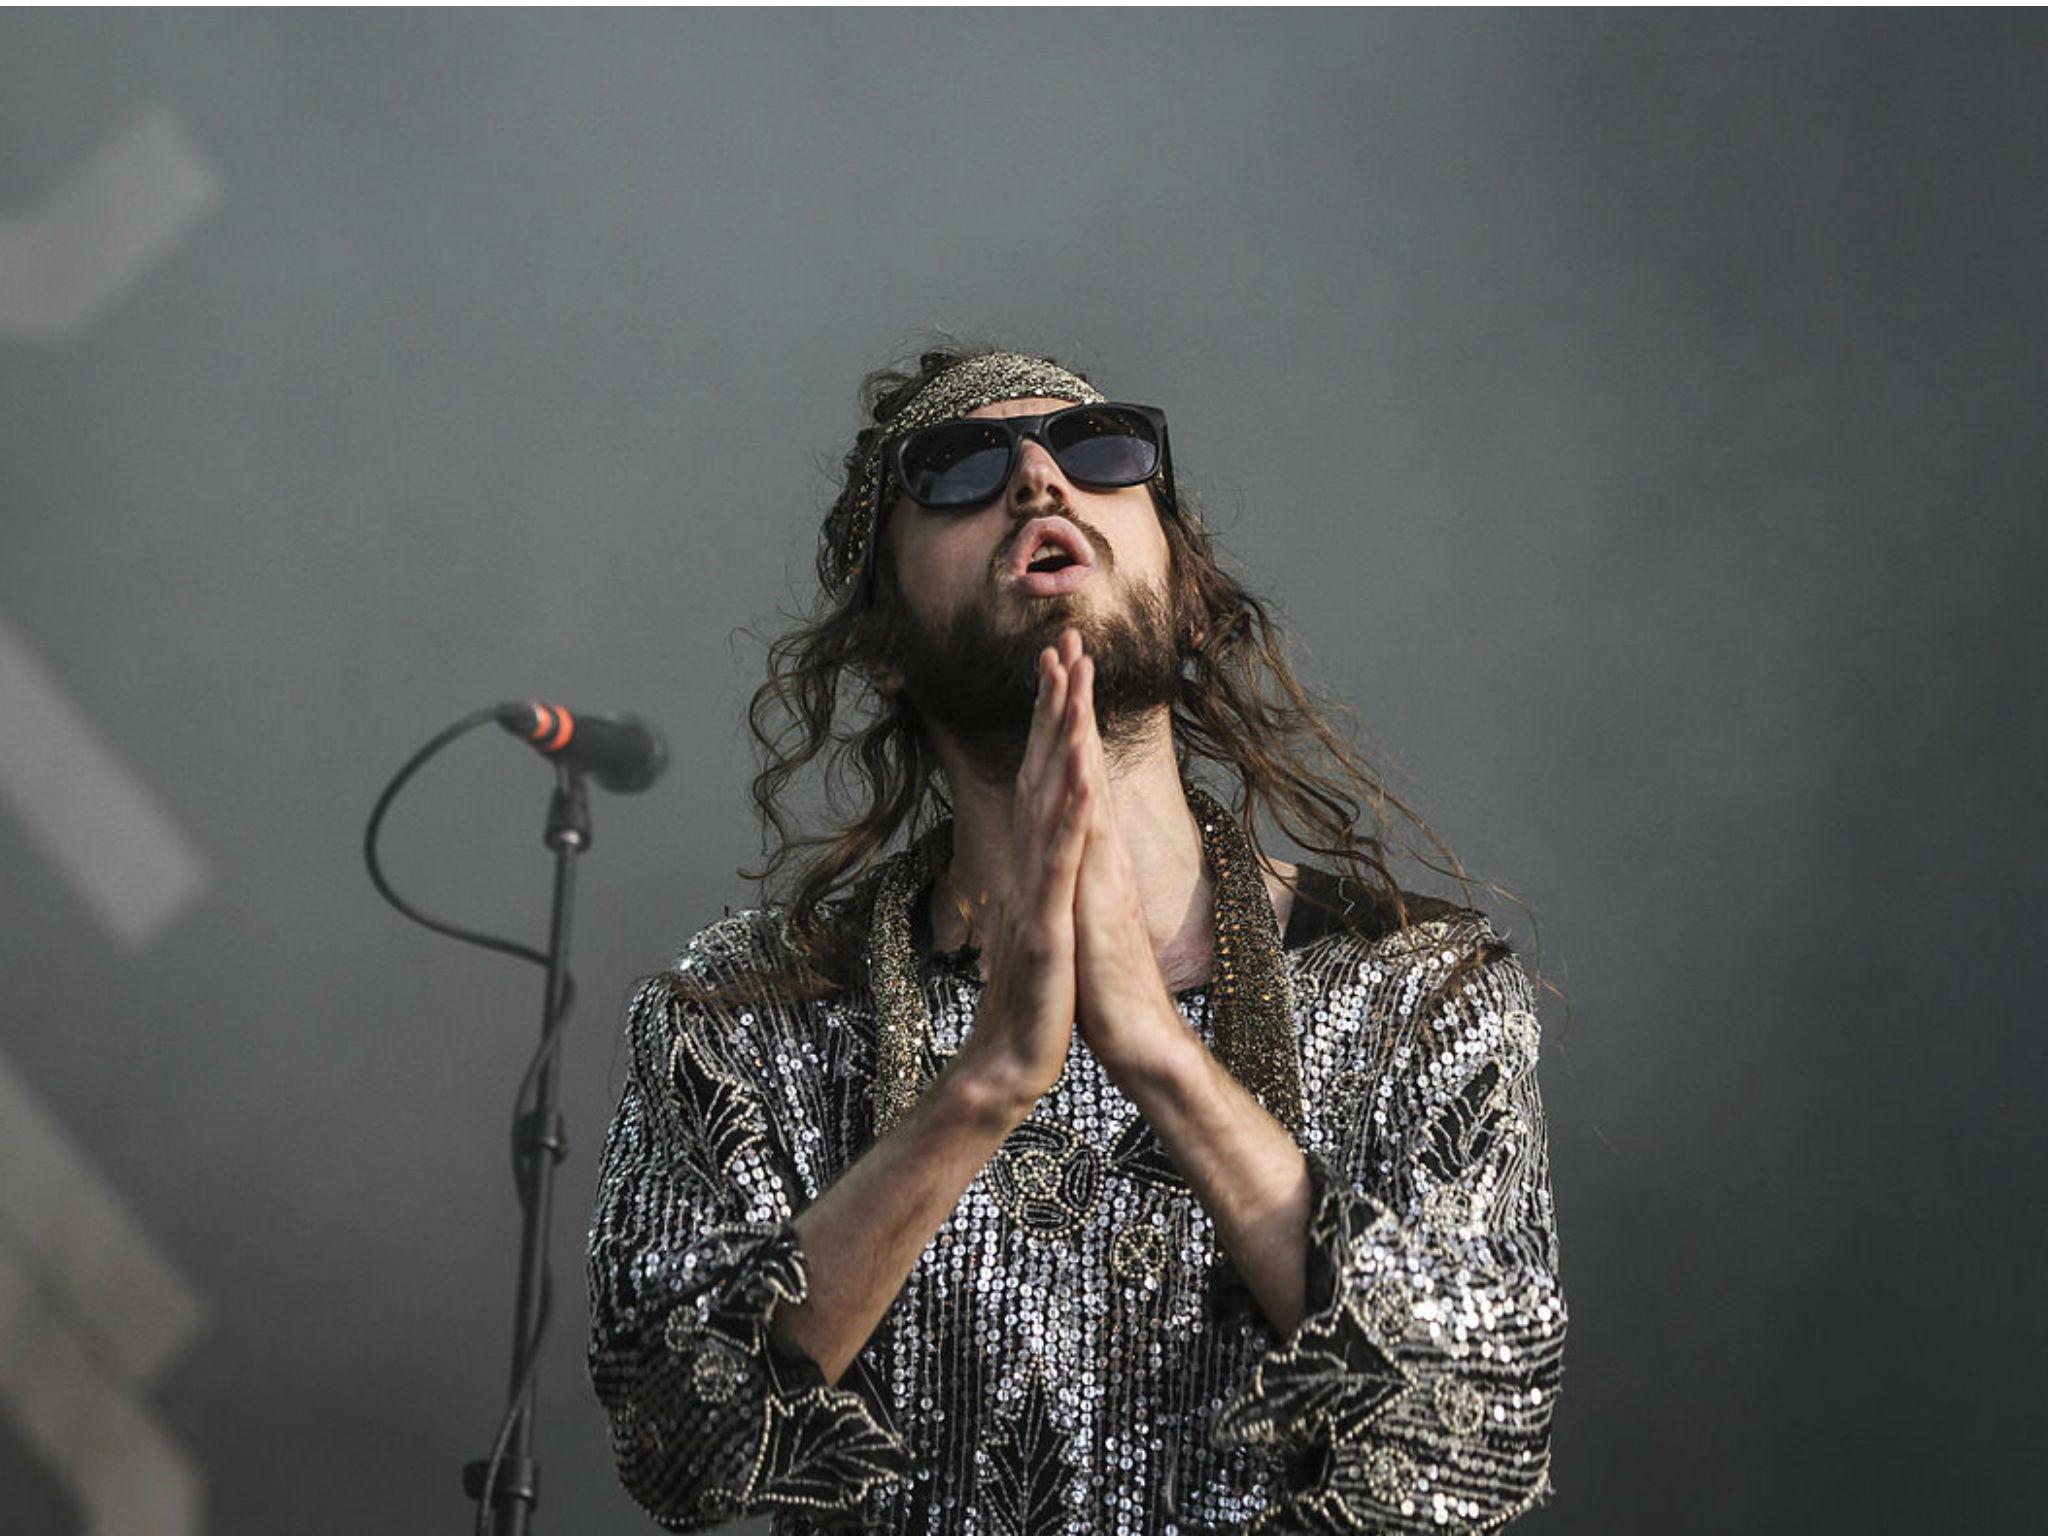 Lead singer Sebastian Pringle of Crystal Fighters likes to connect to people through his music